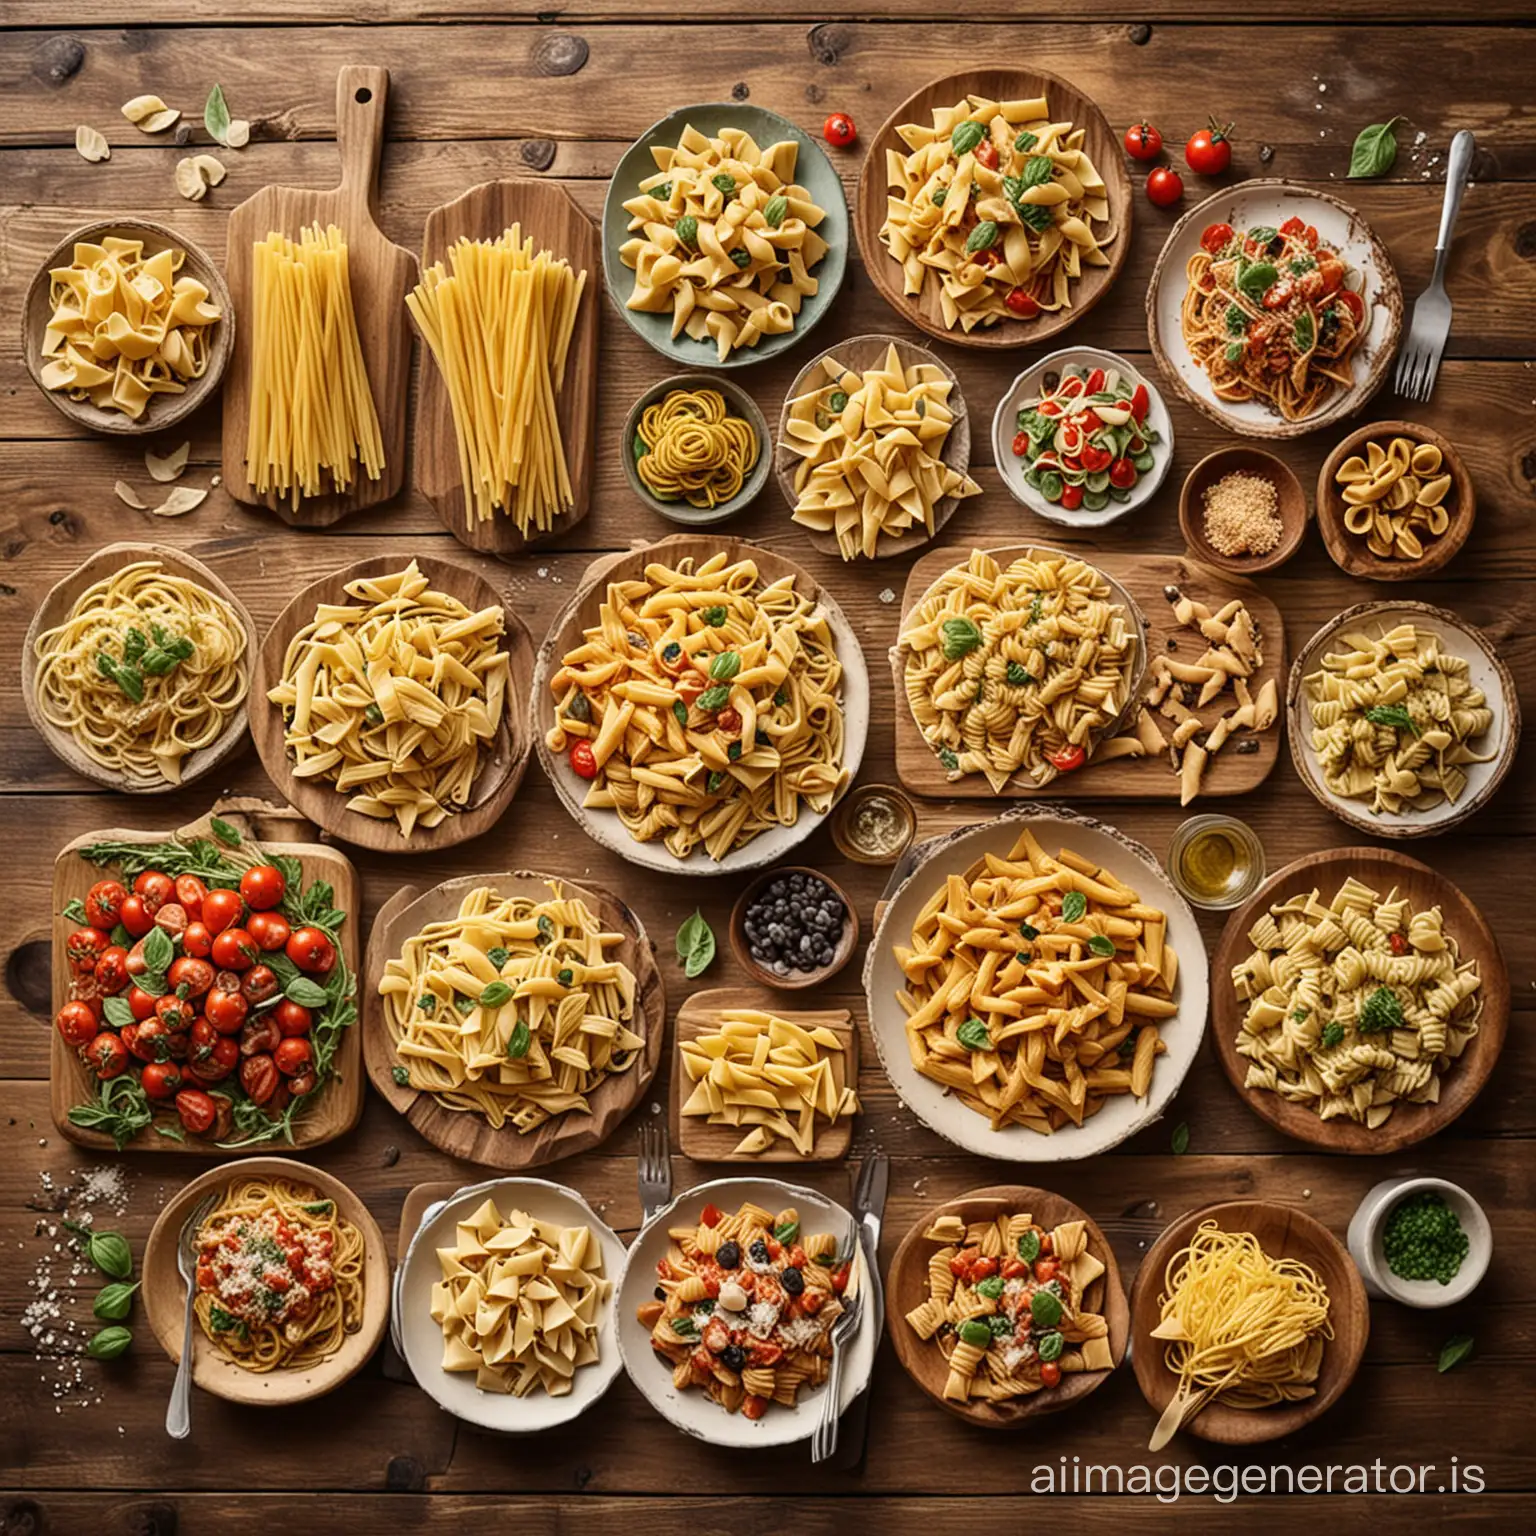 show 10 types of pasta in the woody table with cool and cozy atmospher